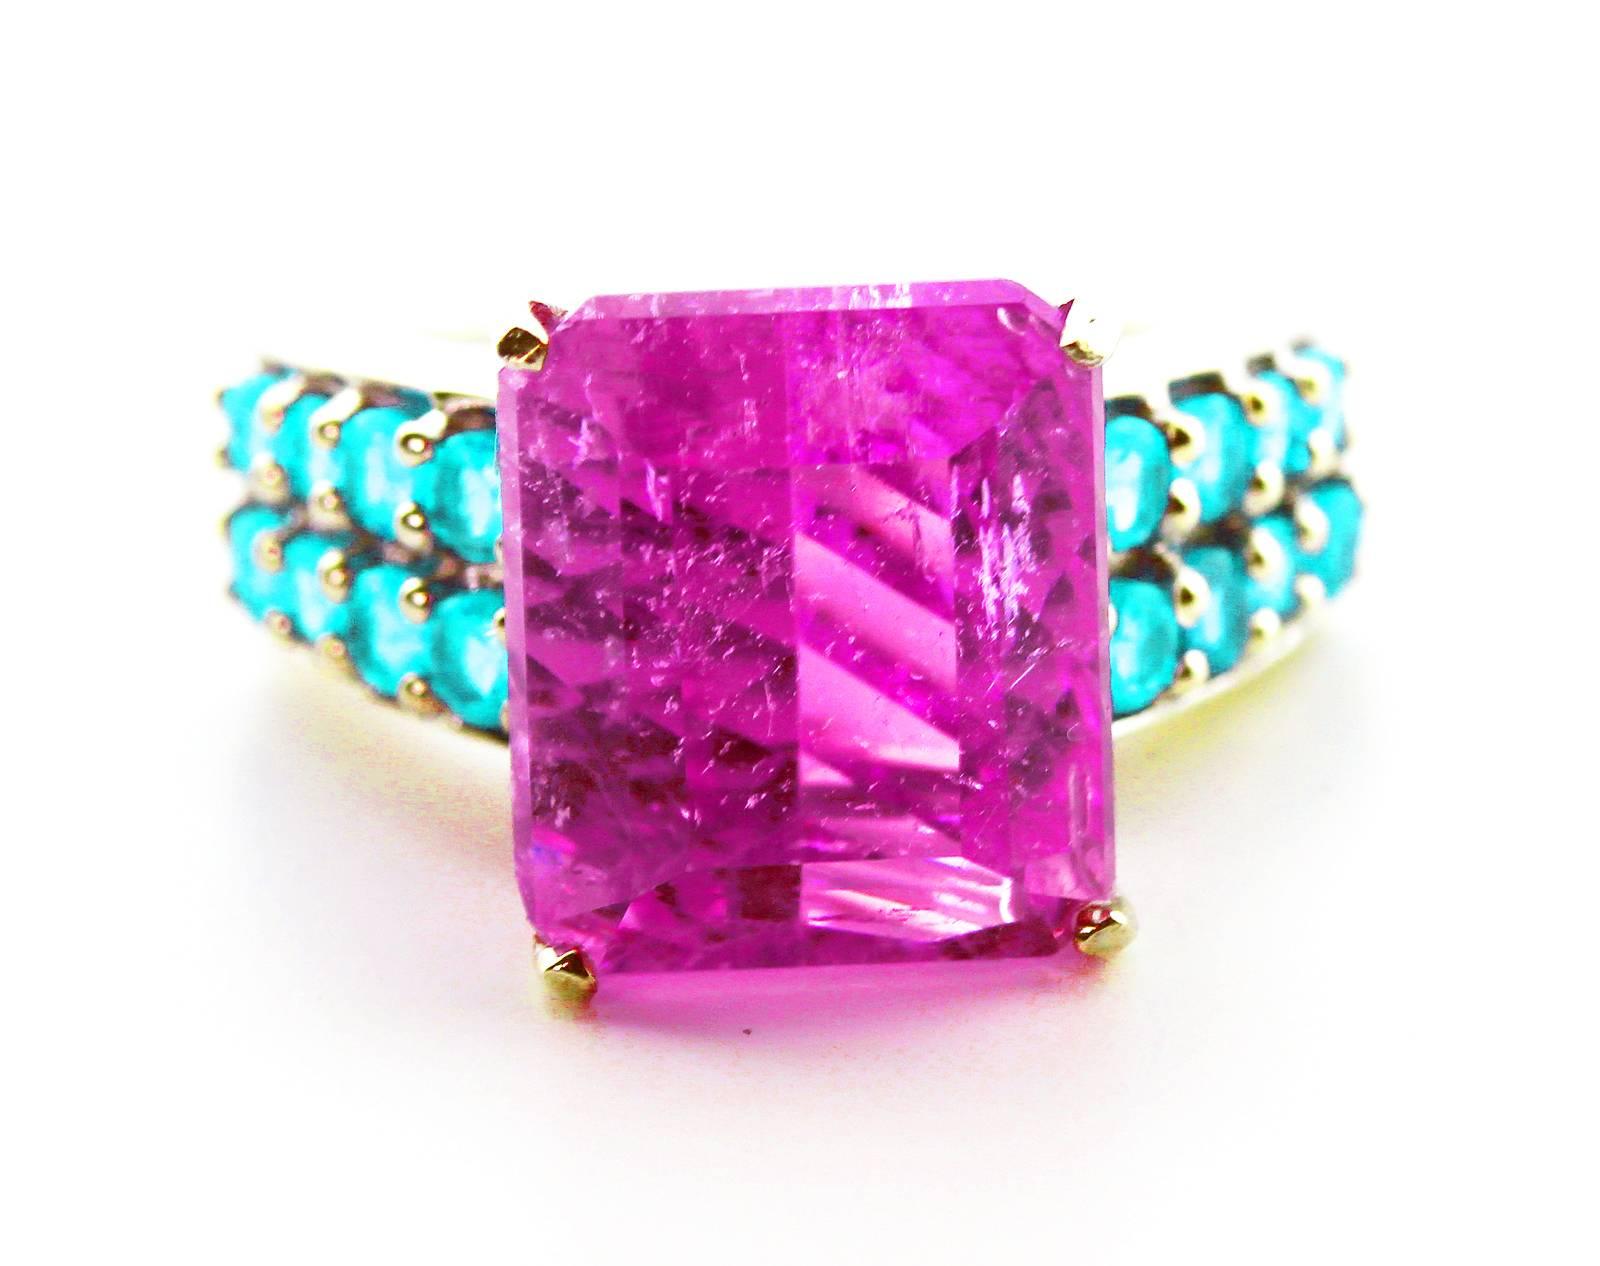 Intense pink transparent translucent sparkling natural unheated untreated 11 Carat Brasilian Kunzite  enhanced with brilliant blue Apatite set in rhodium plated Sterling Silver ring.  The ring is a size 7 sizable.